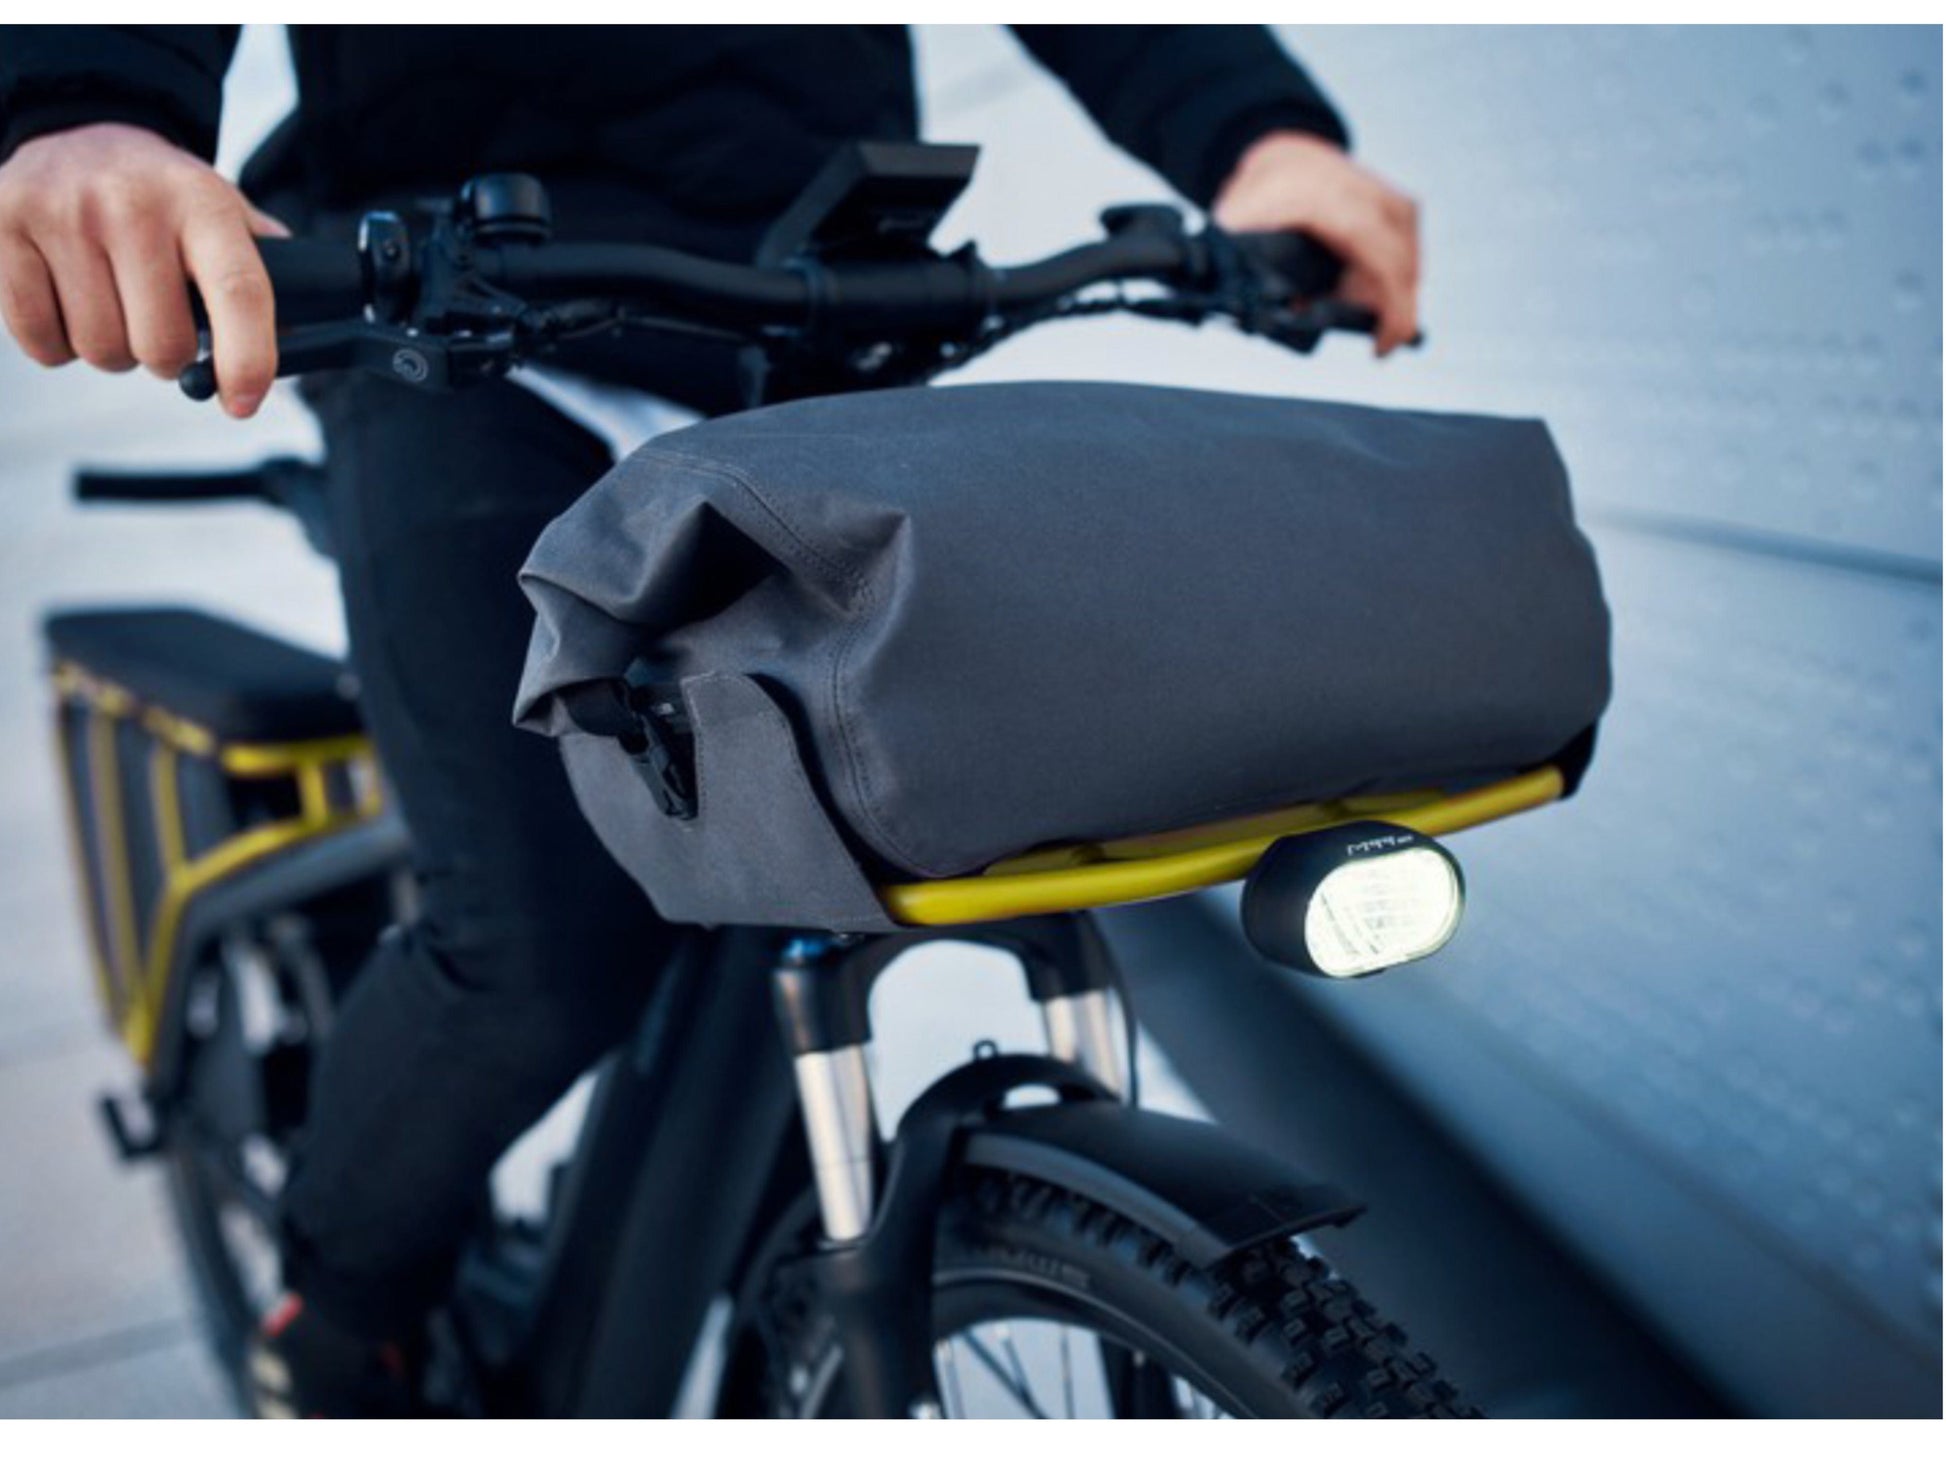 Riese and Muller Multicharger GT Vario 750 emtb hardtail close up front carrier bag option headlight